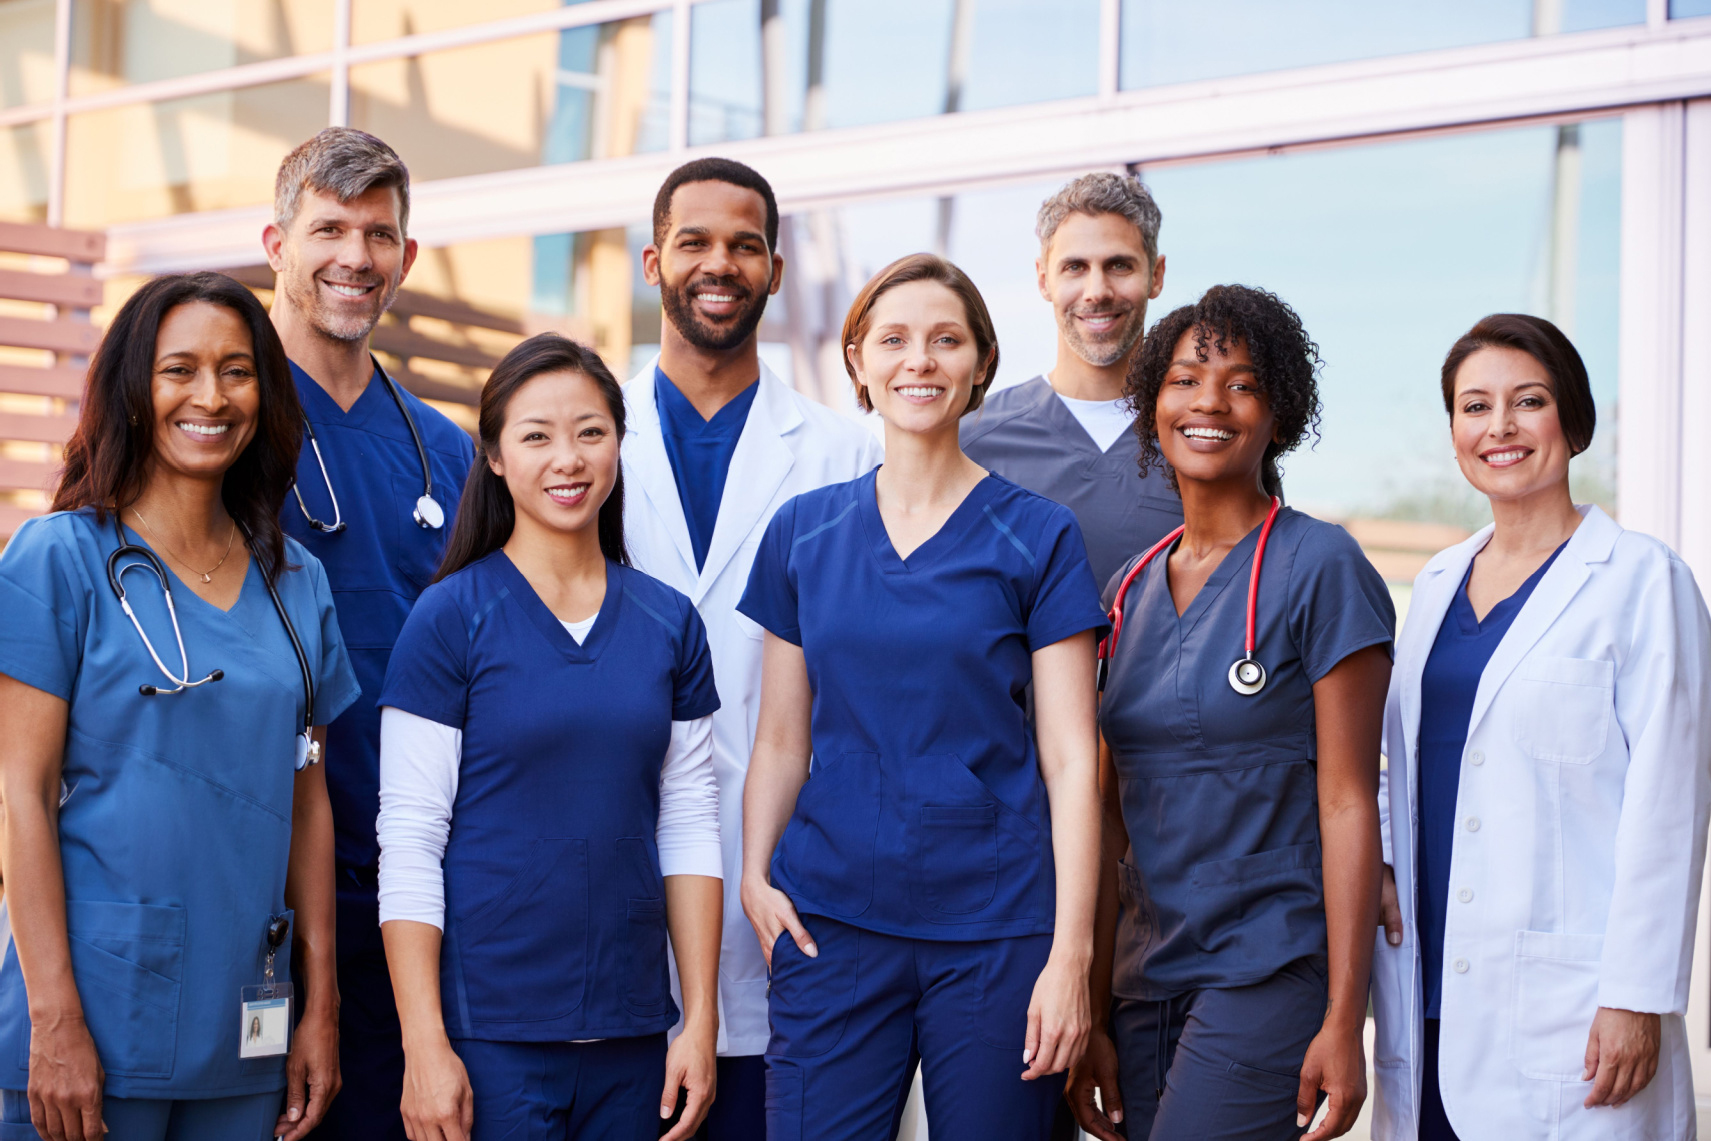 Smiling healthcare team standing outside a hospital